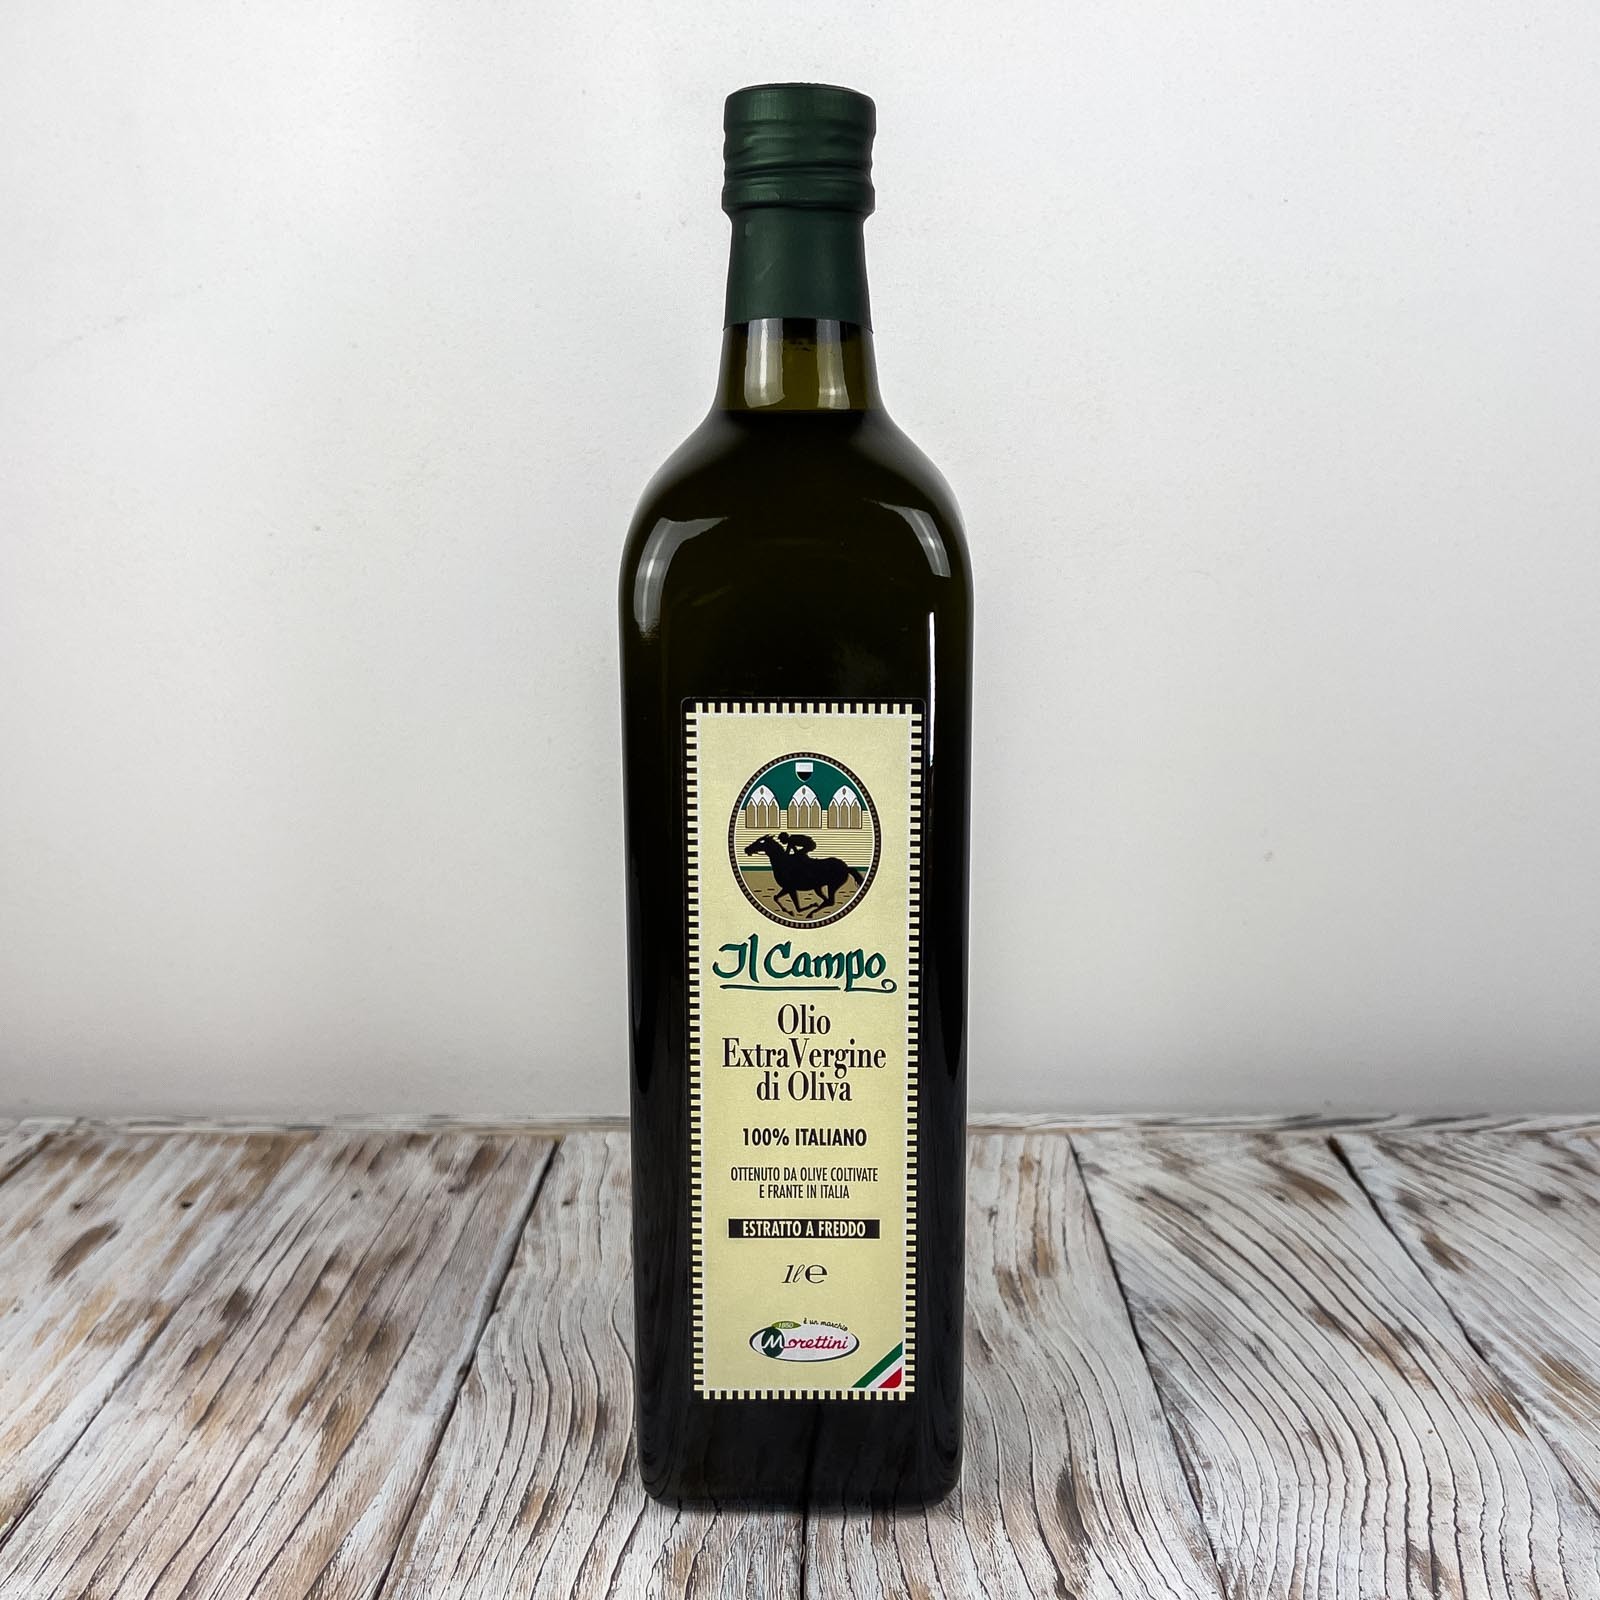 “Il Campo 100% Italiano”, extra virgin olive oil, produced with the method of cold processing of olives harvested and pressed in Italy - Year of production 2021/2022.